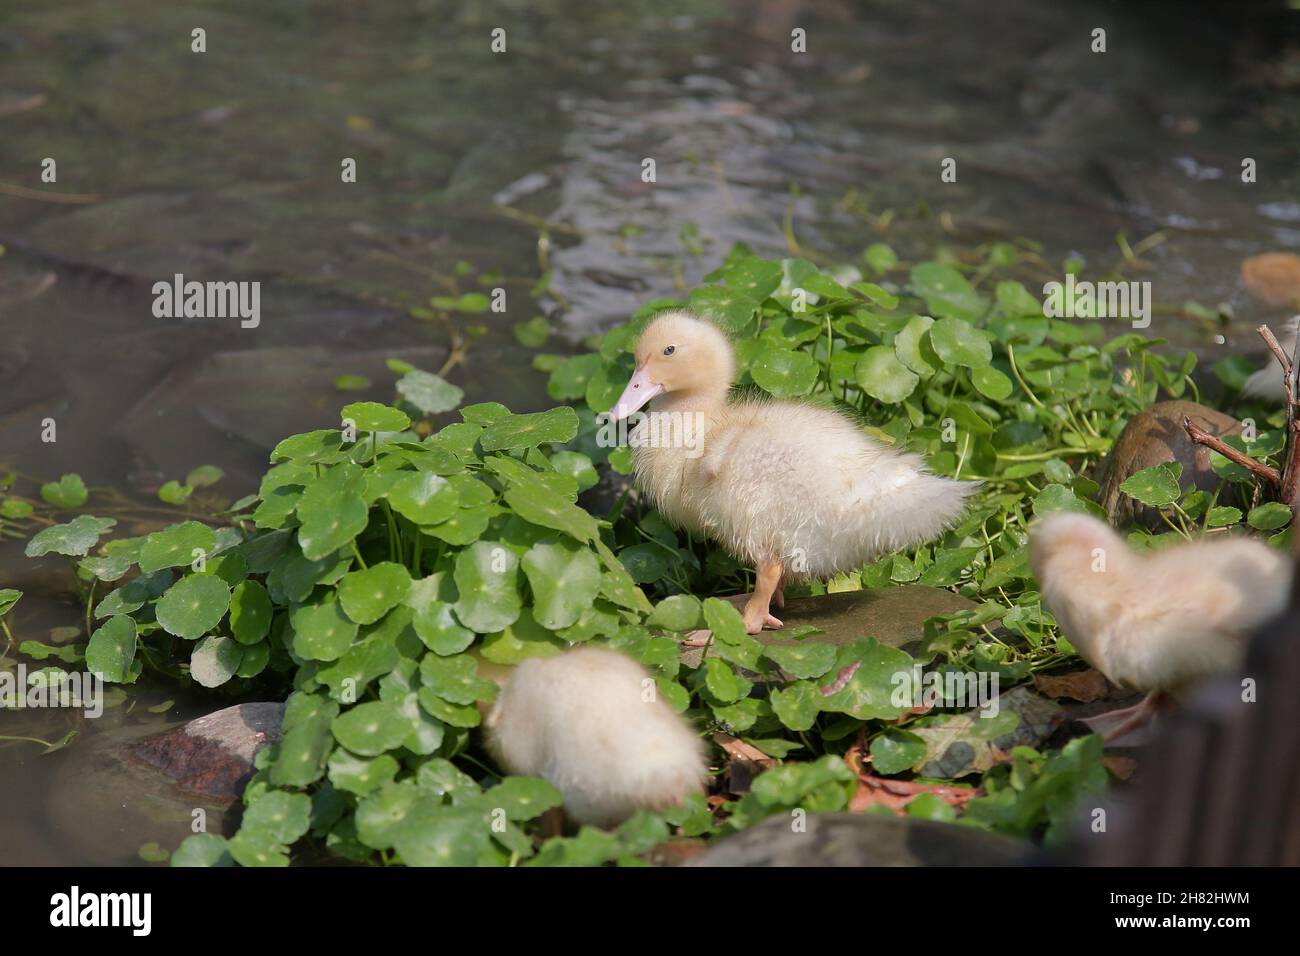 cute yellow duckling swimming in a pond with lots of fish Stock Photo